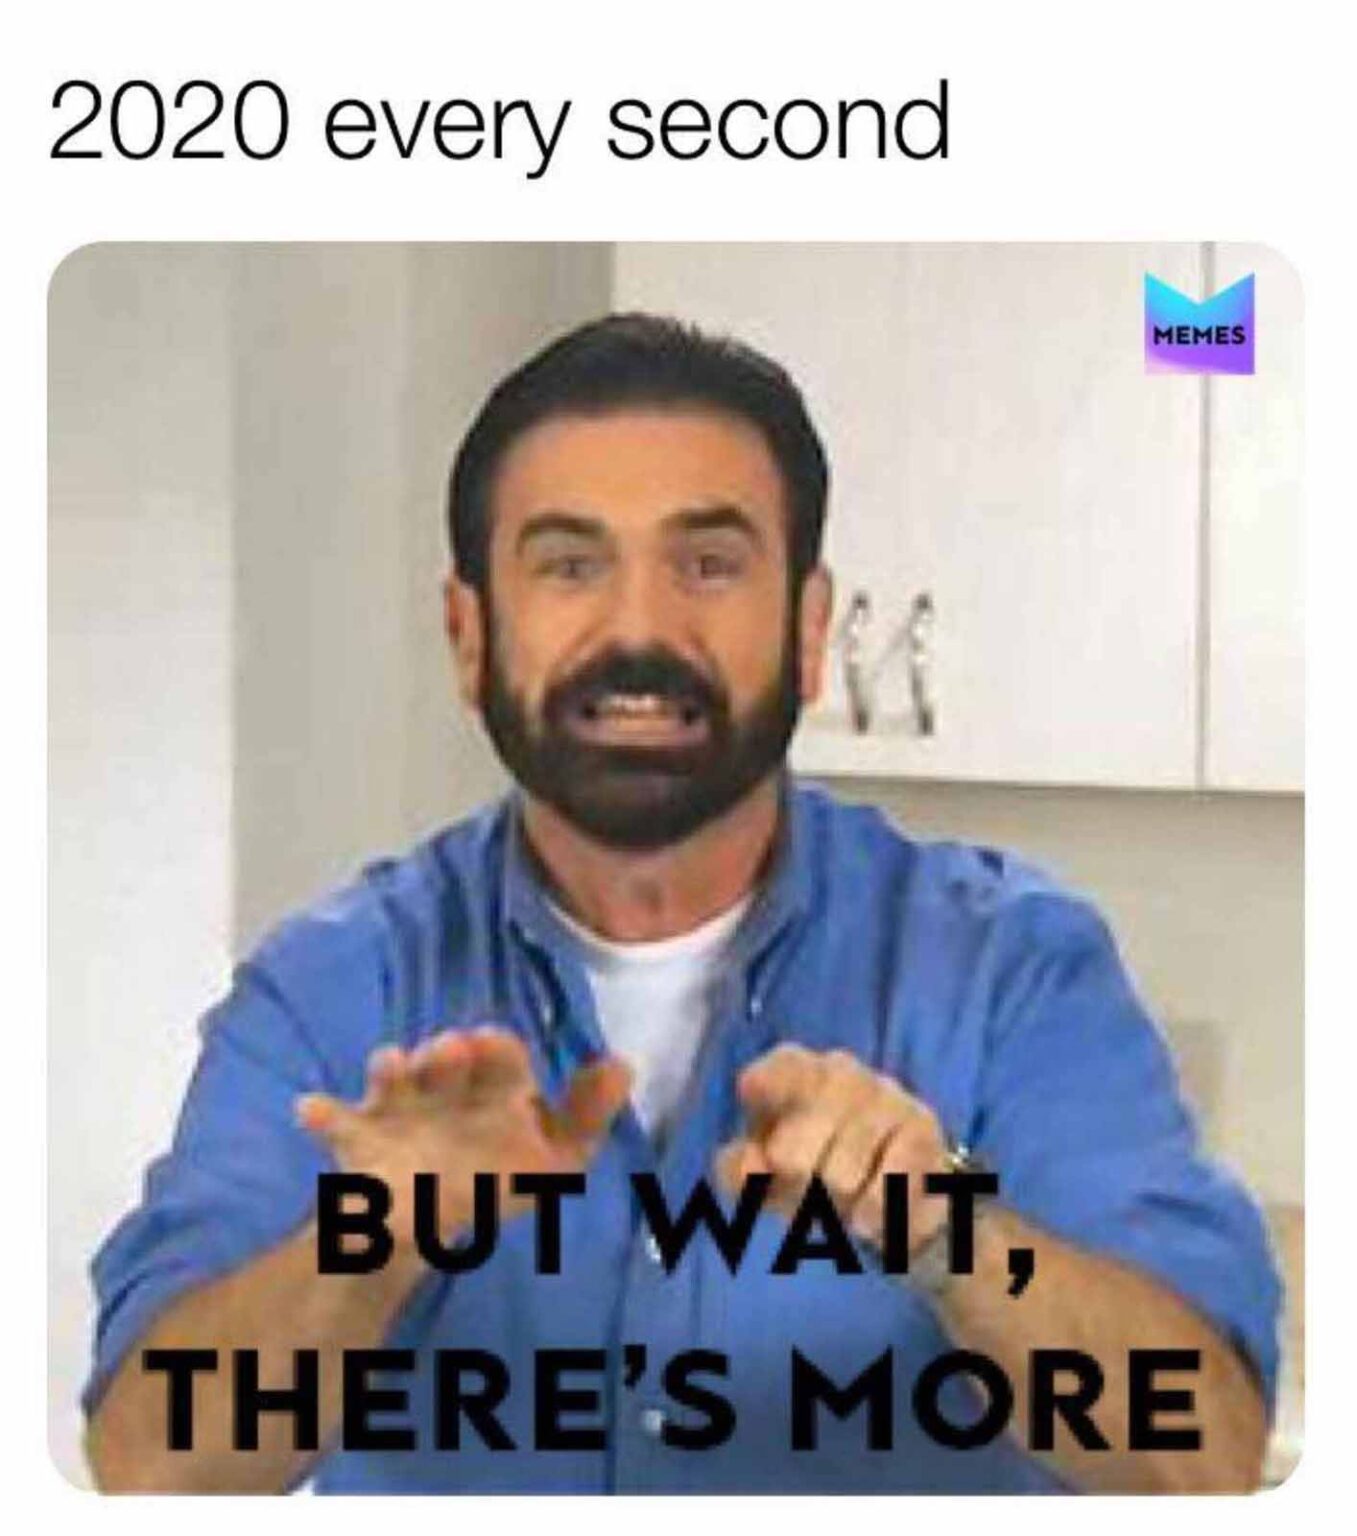 As the title for this article so plainly states, 2020 is a dumpster fire. Here are memes that perfectly describe the mess that is 2020.